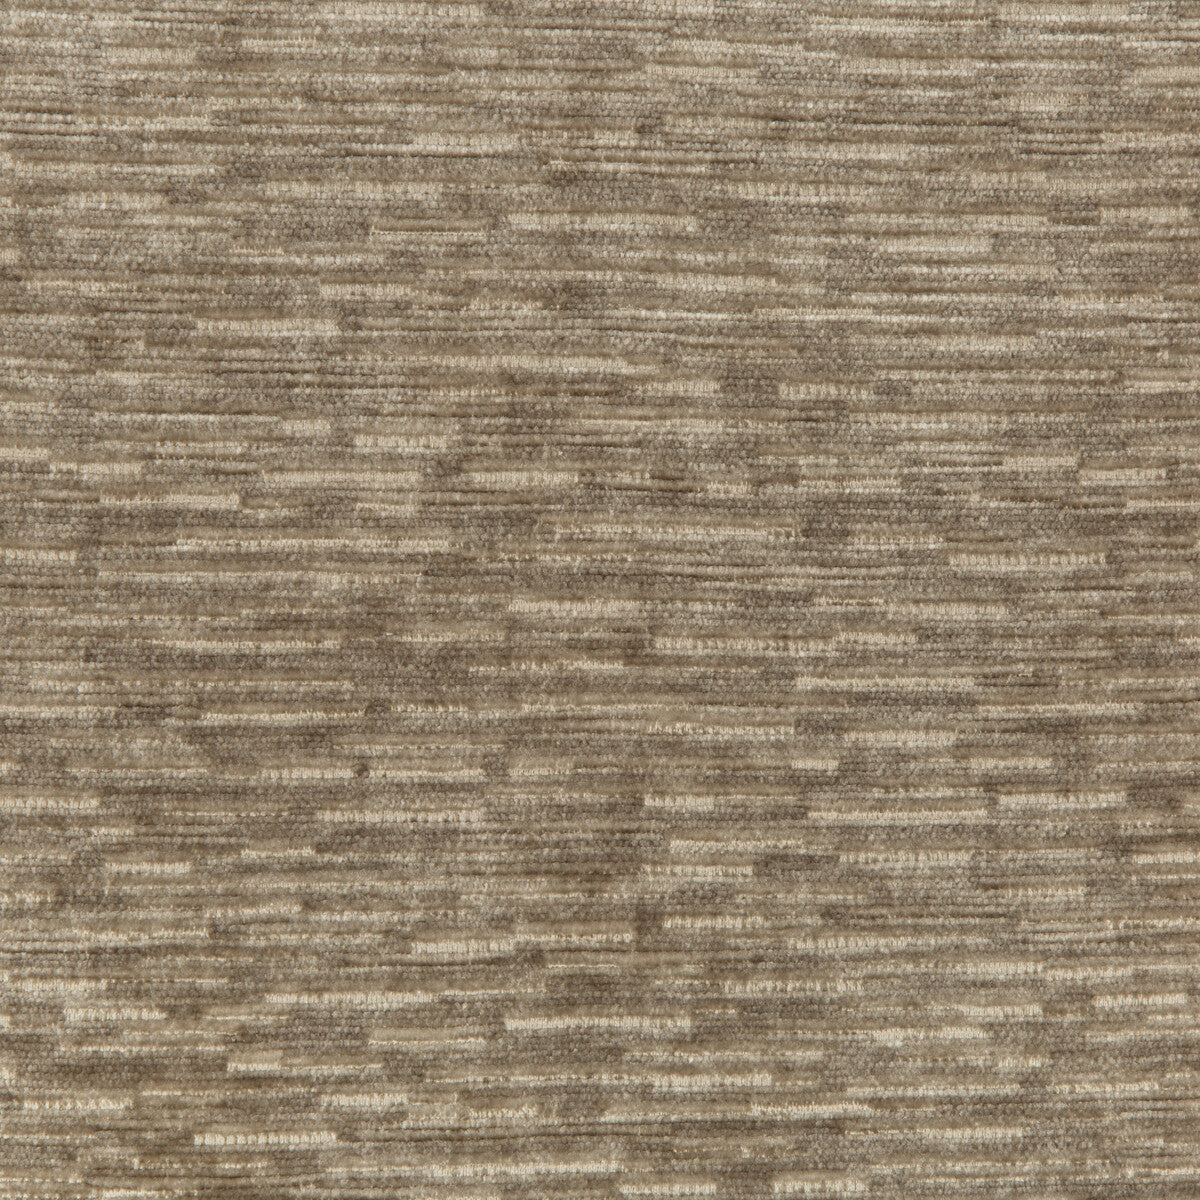 Kravet Smart fabric in 34731-16 color - pattern 34731.16.0 - by Kravet Smart in the Performance collection